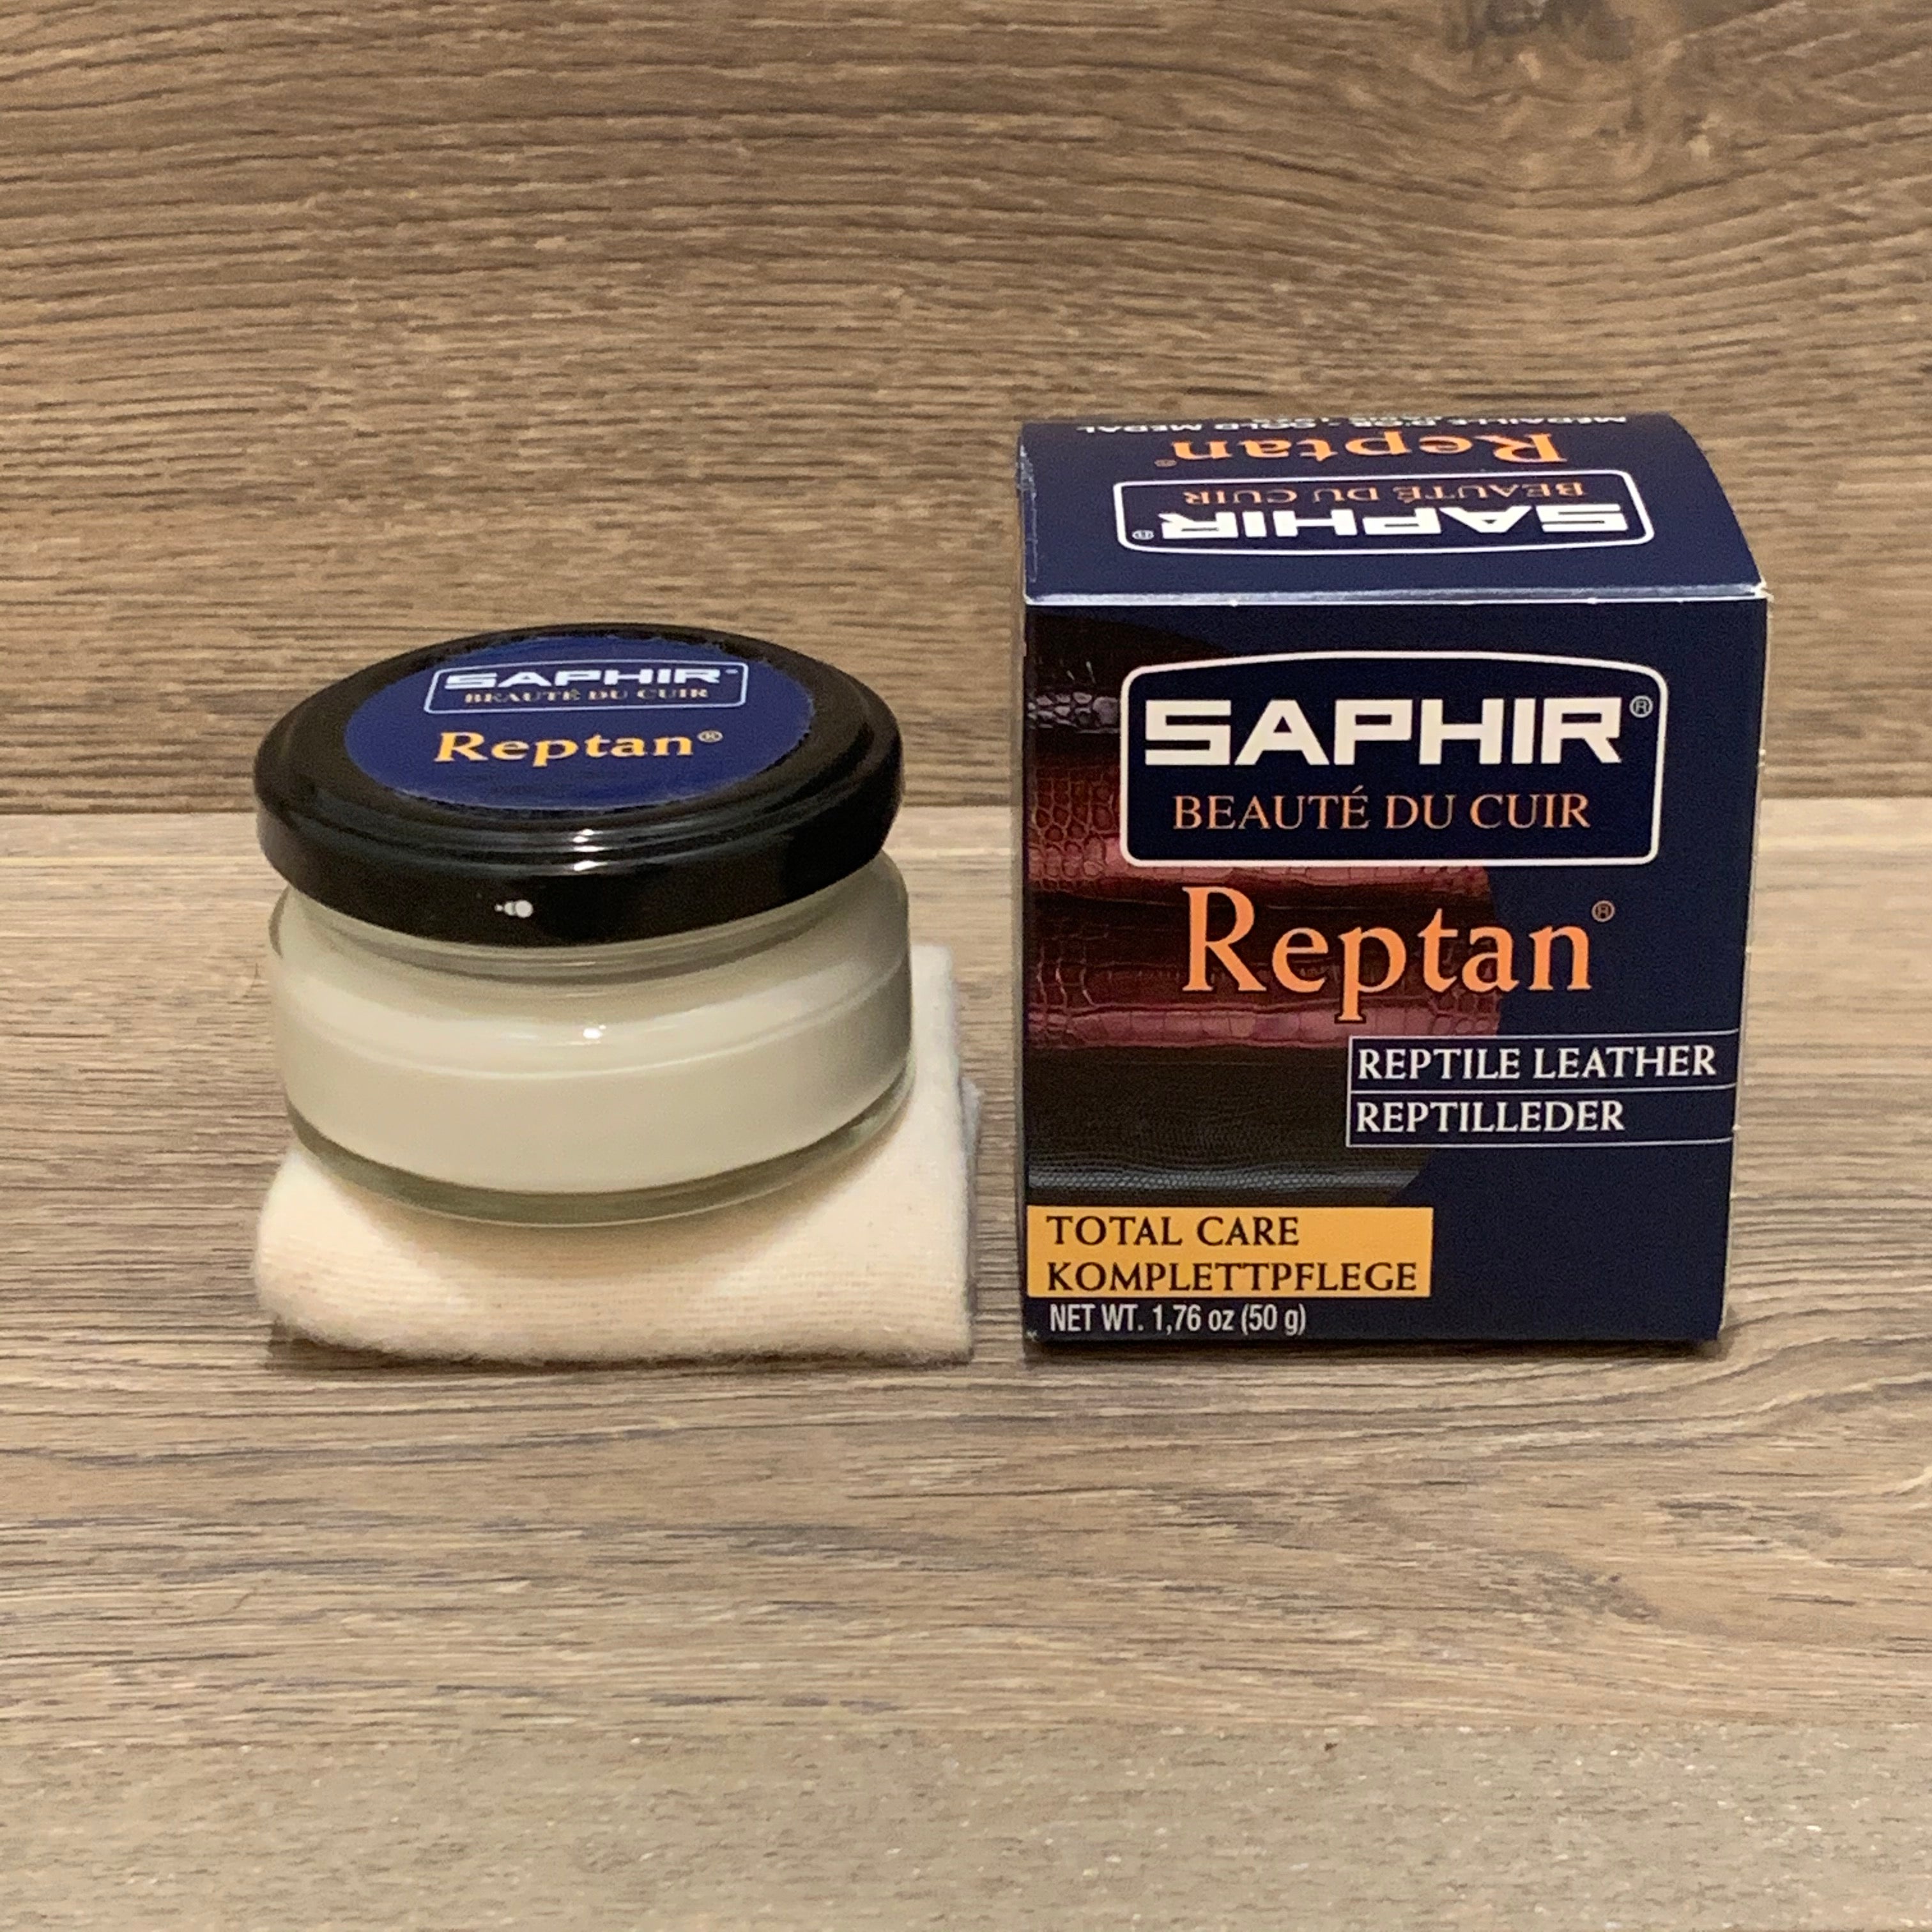 Saphir Reptan for exotic or reptile leather. Stocked in Australia